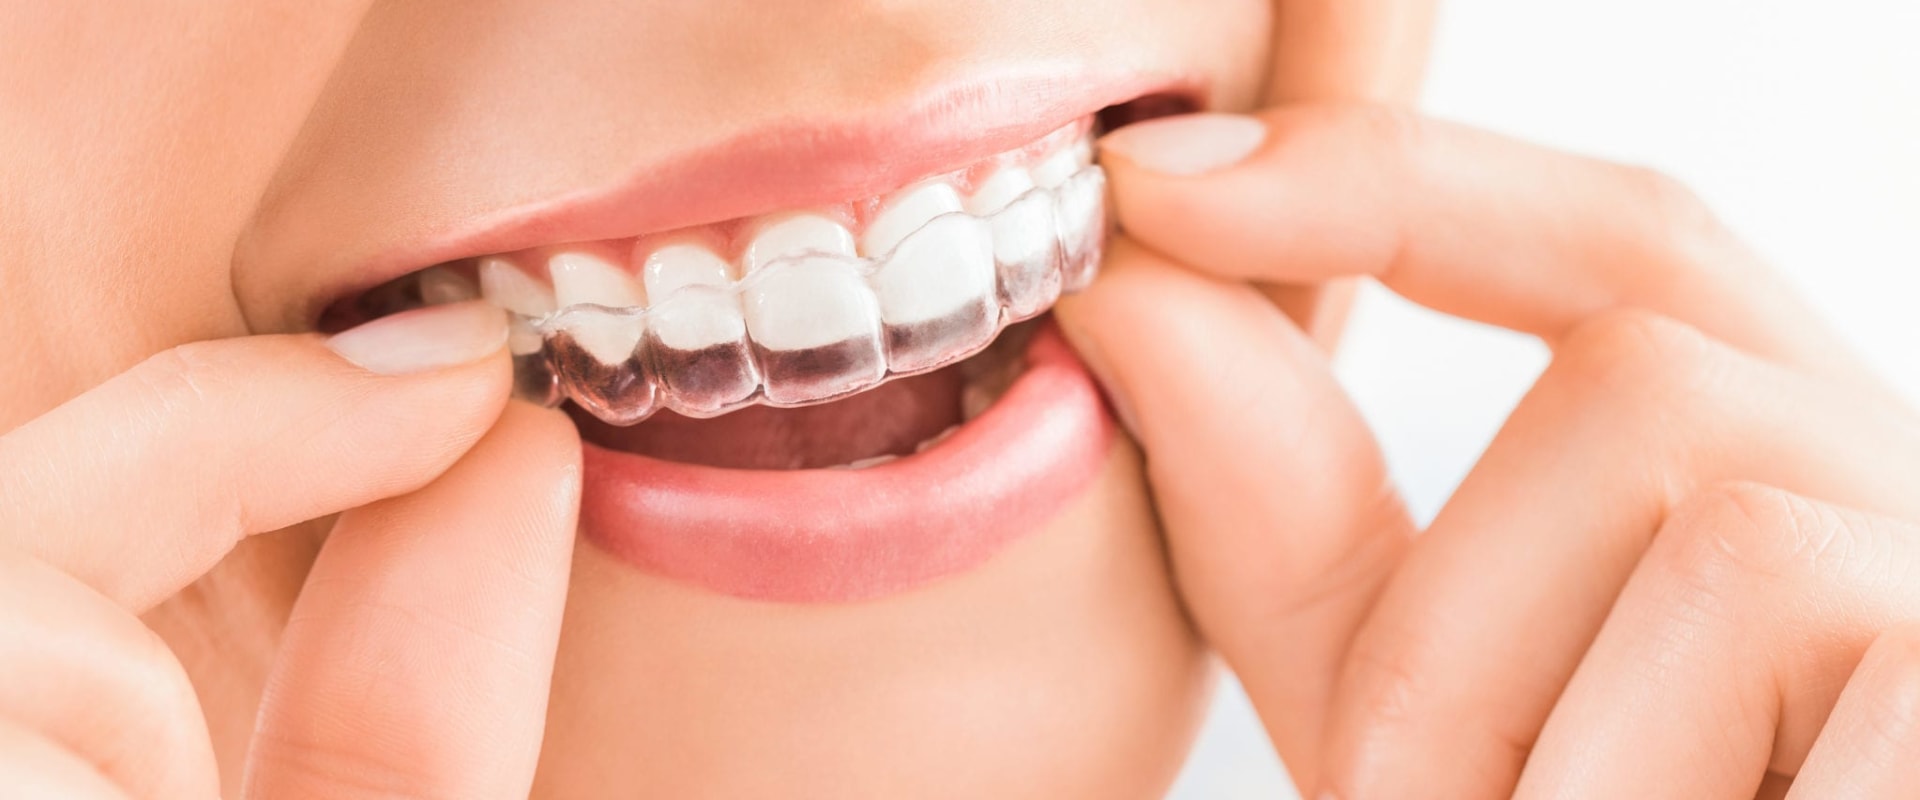 Tips for Wearing Your Aligners Comfortably